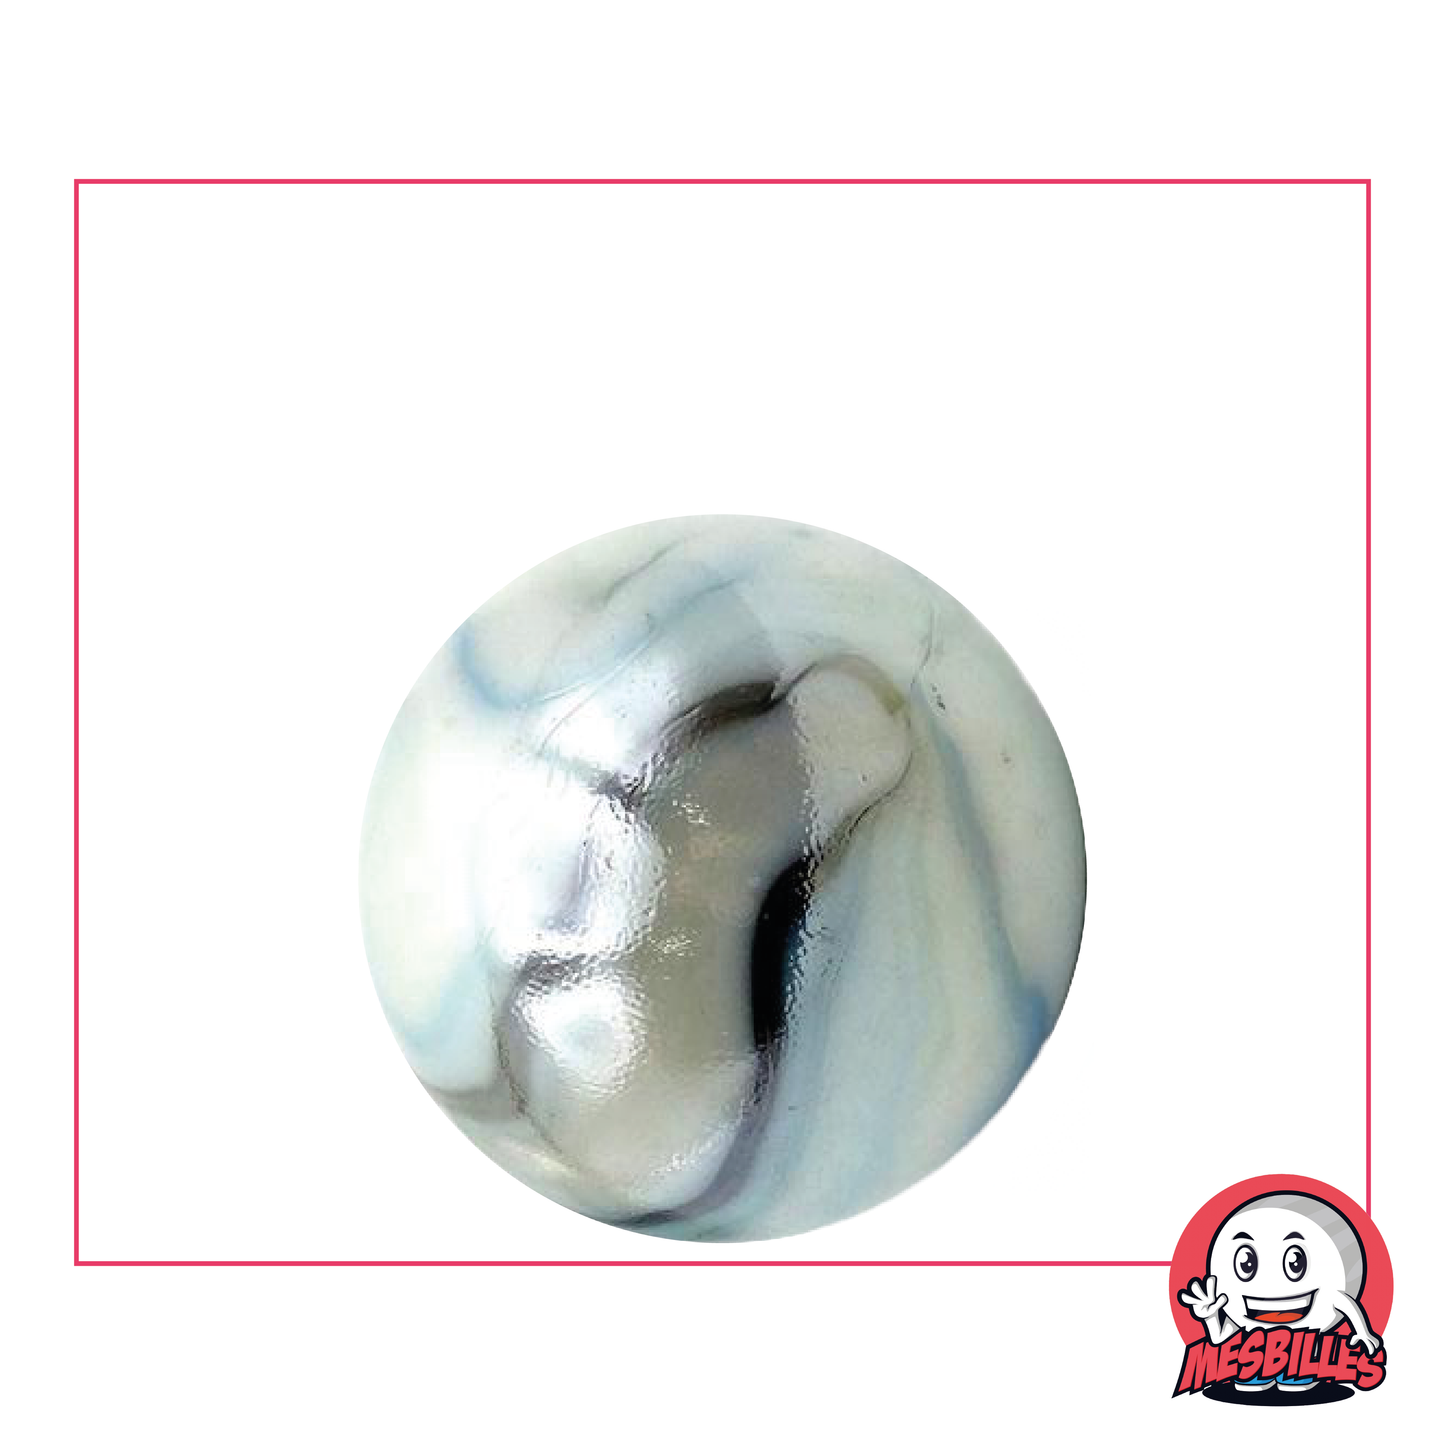 1 White Tiger Marble 25 mm